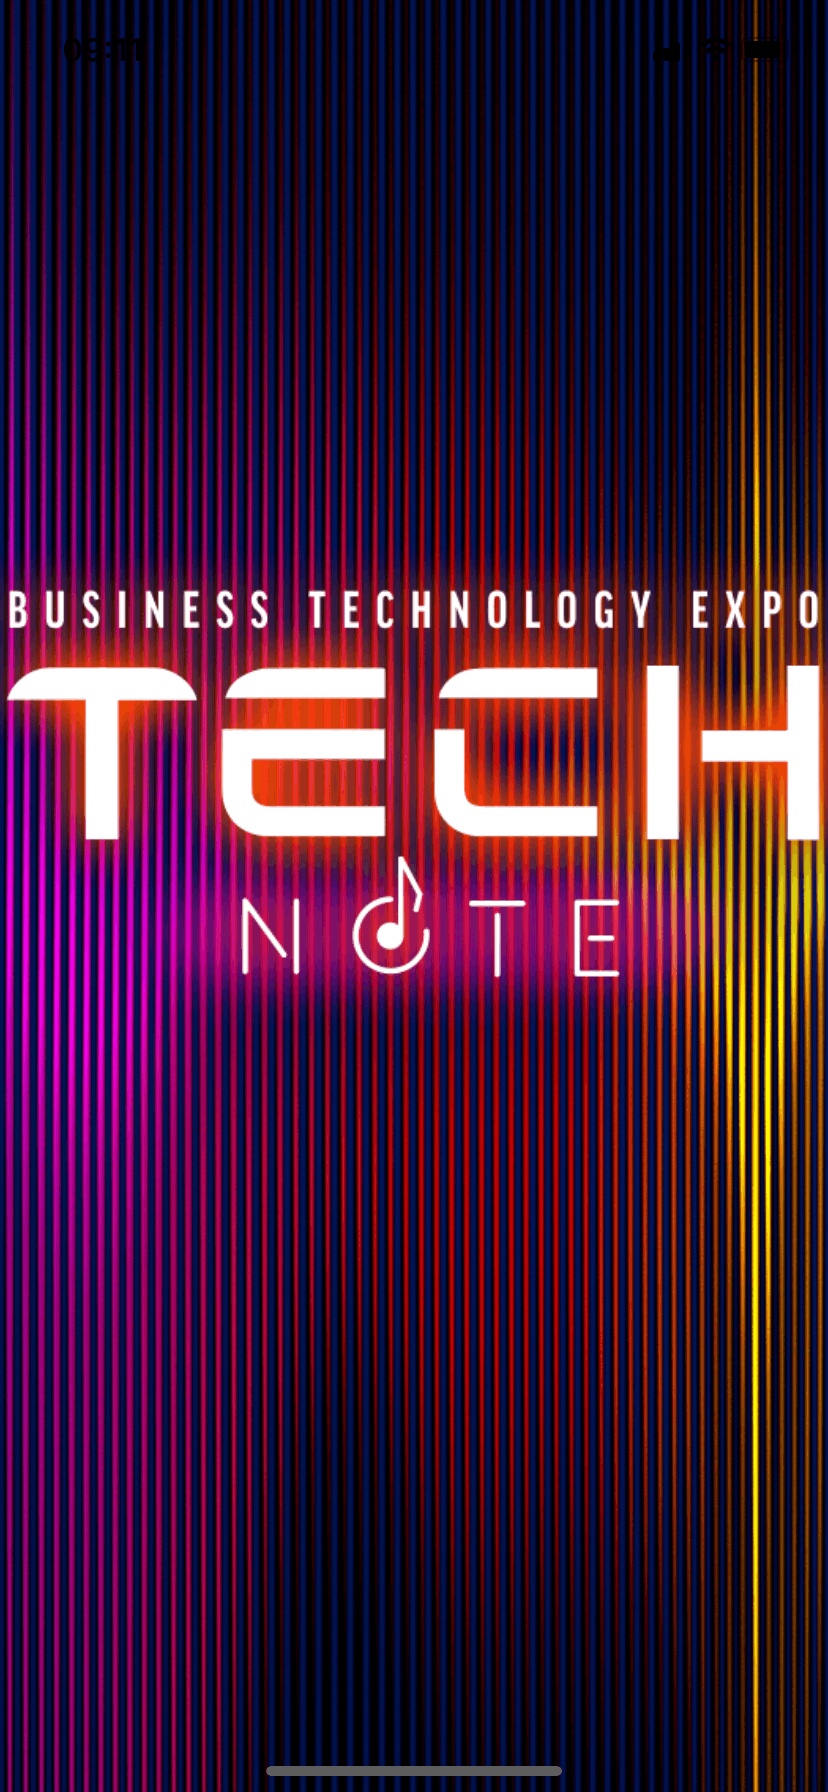 Tech Note - Business Technology Expo